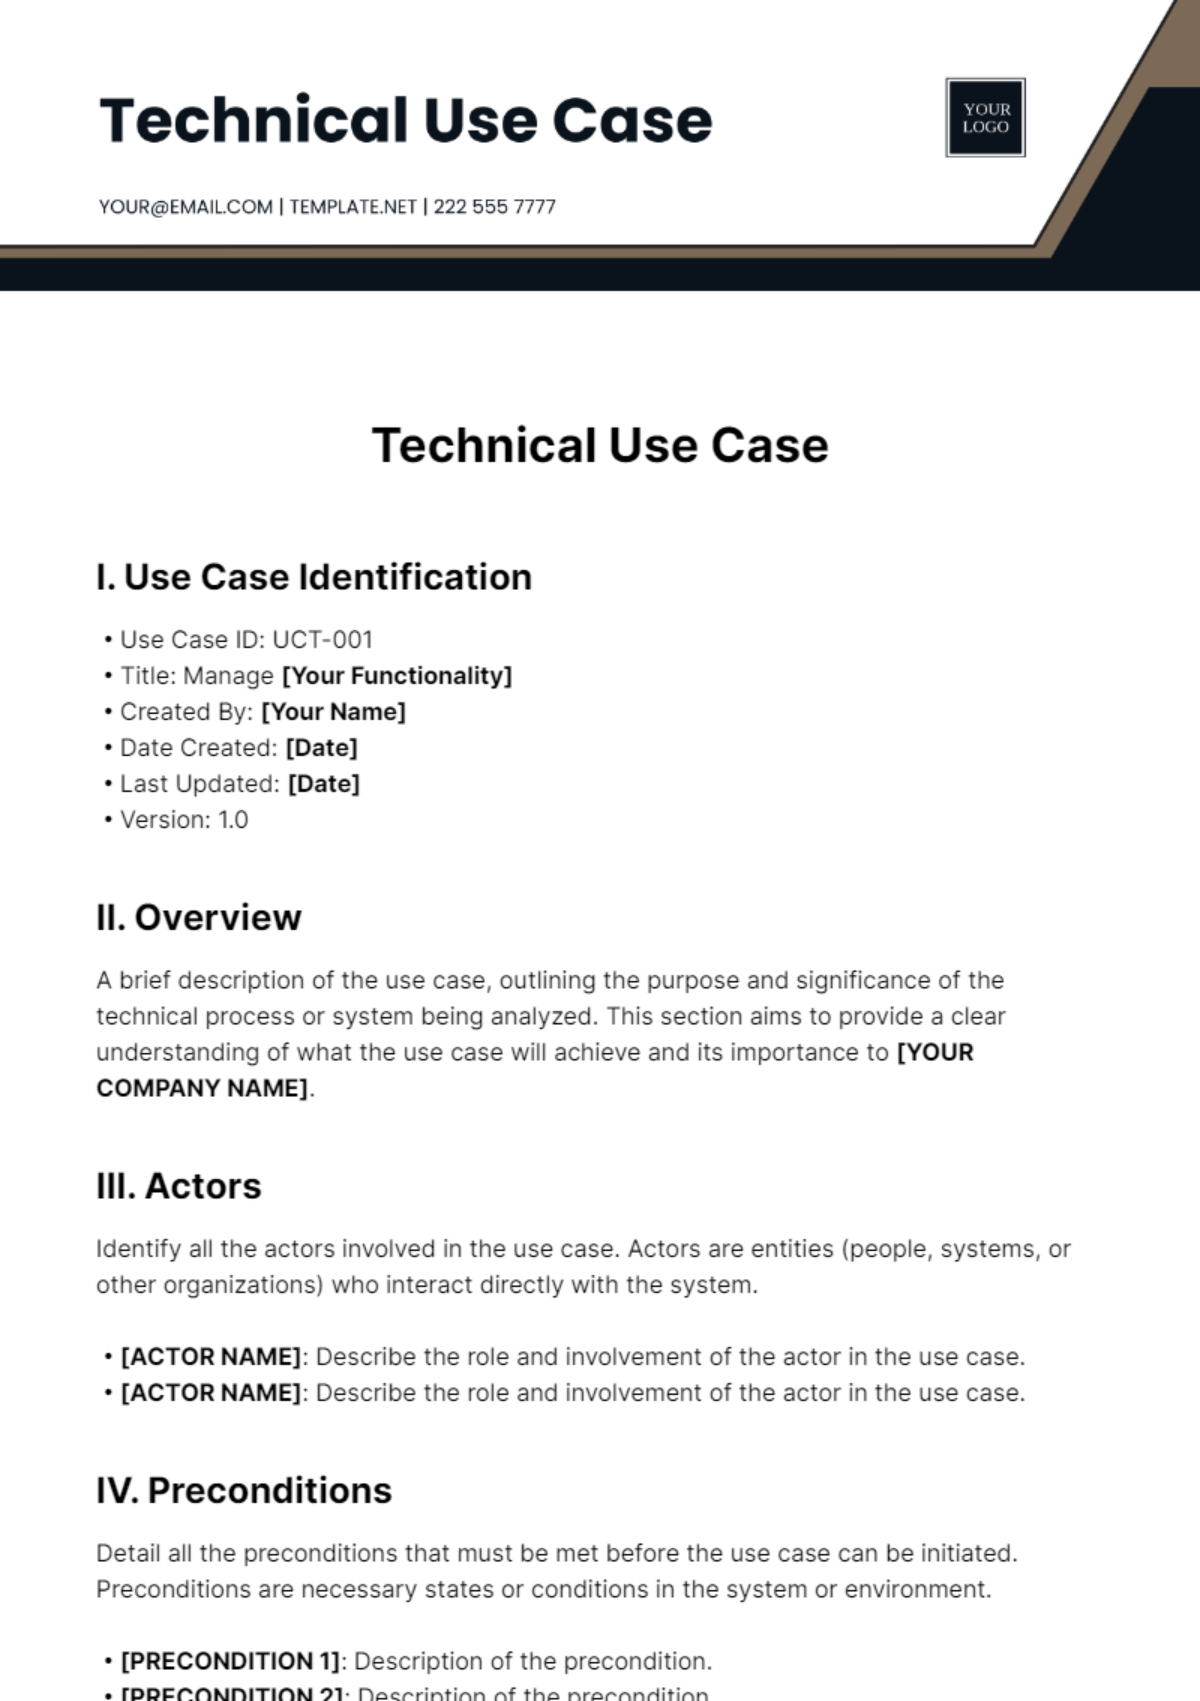 Free Technical Use Case Template